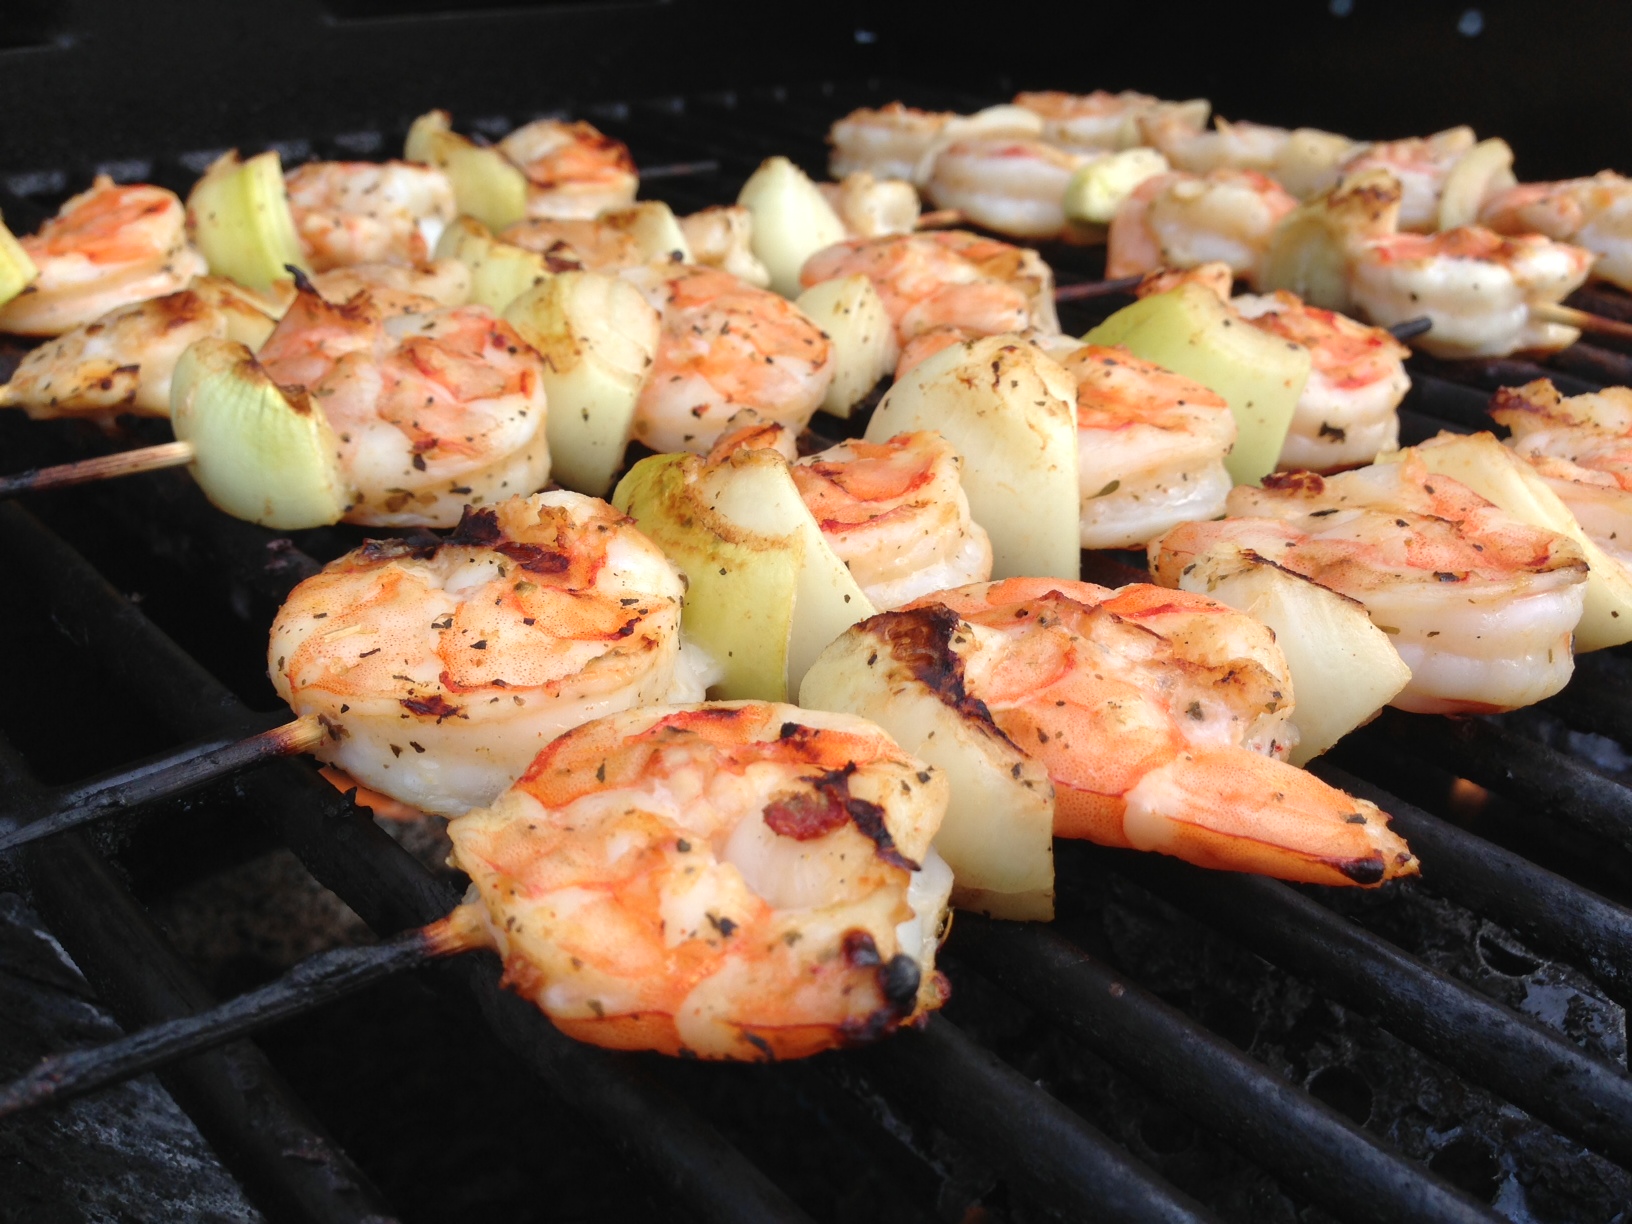 Shrimp on the grill makes this Fathers Day a great one!